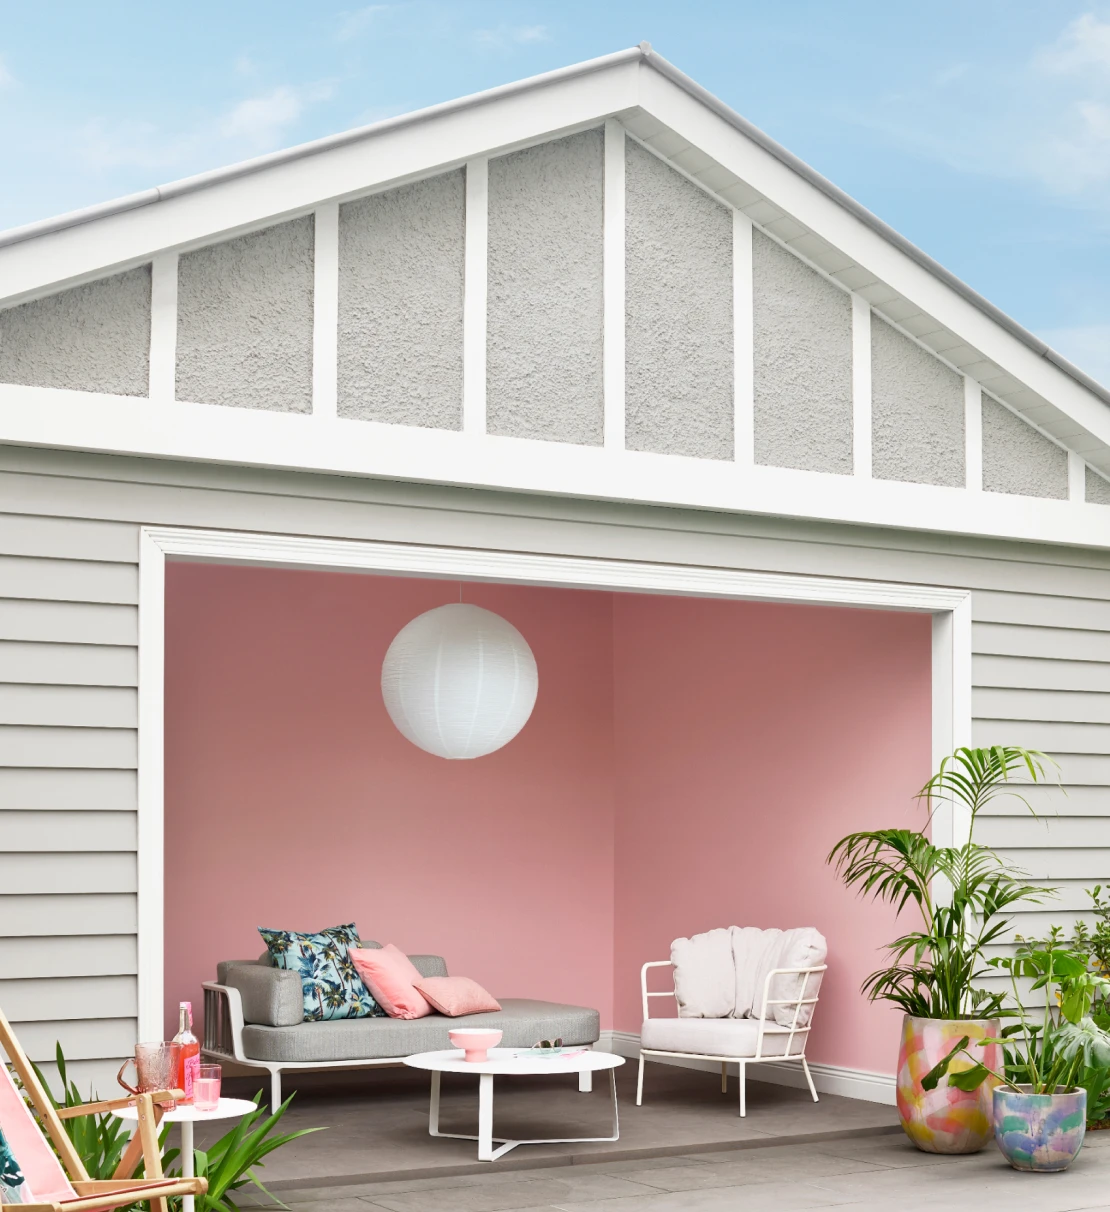 Pool house with Pink Dust coloured interior walls, Tranquil Retreat coloured weatherboards and Snowy Mountains Half trims. Area is decorated with lounge furniture and greenery. 